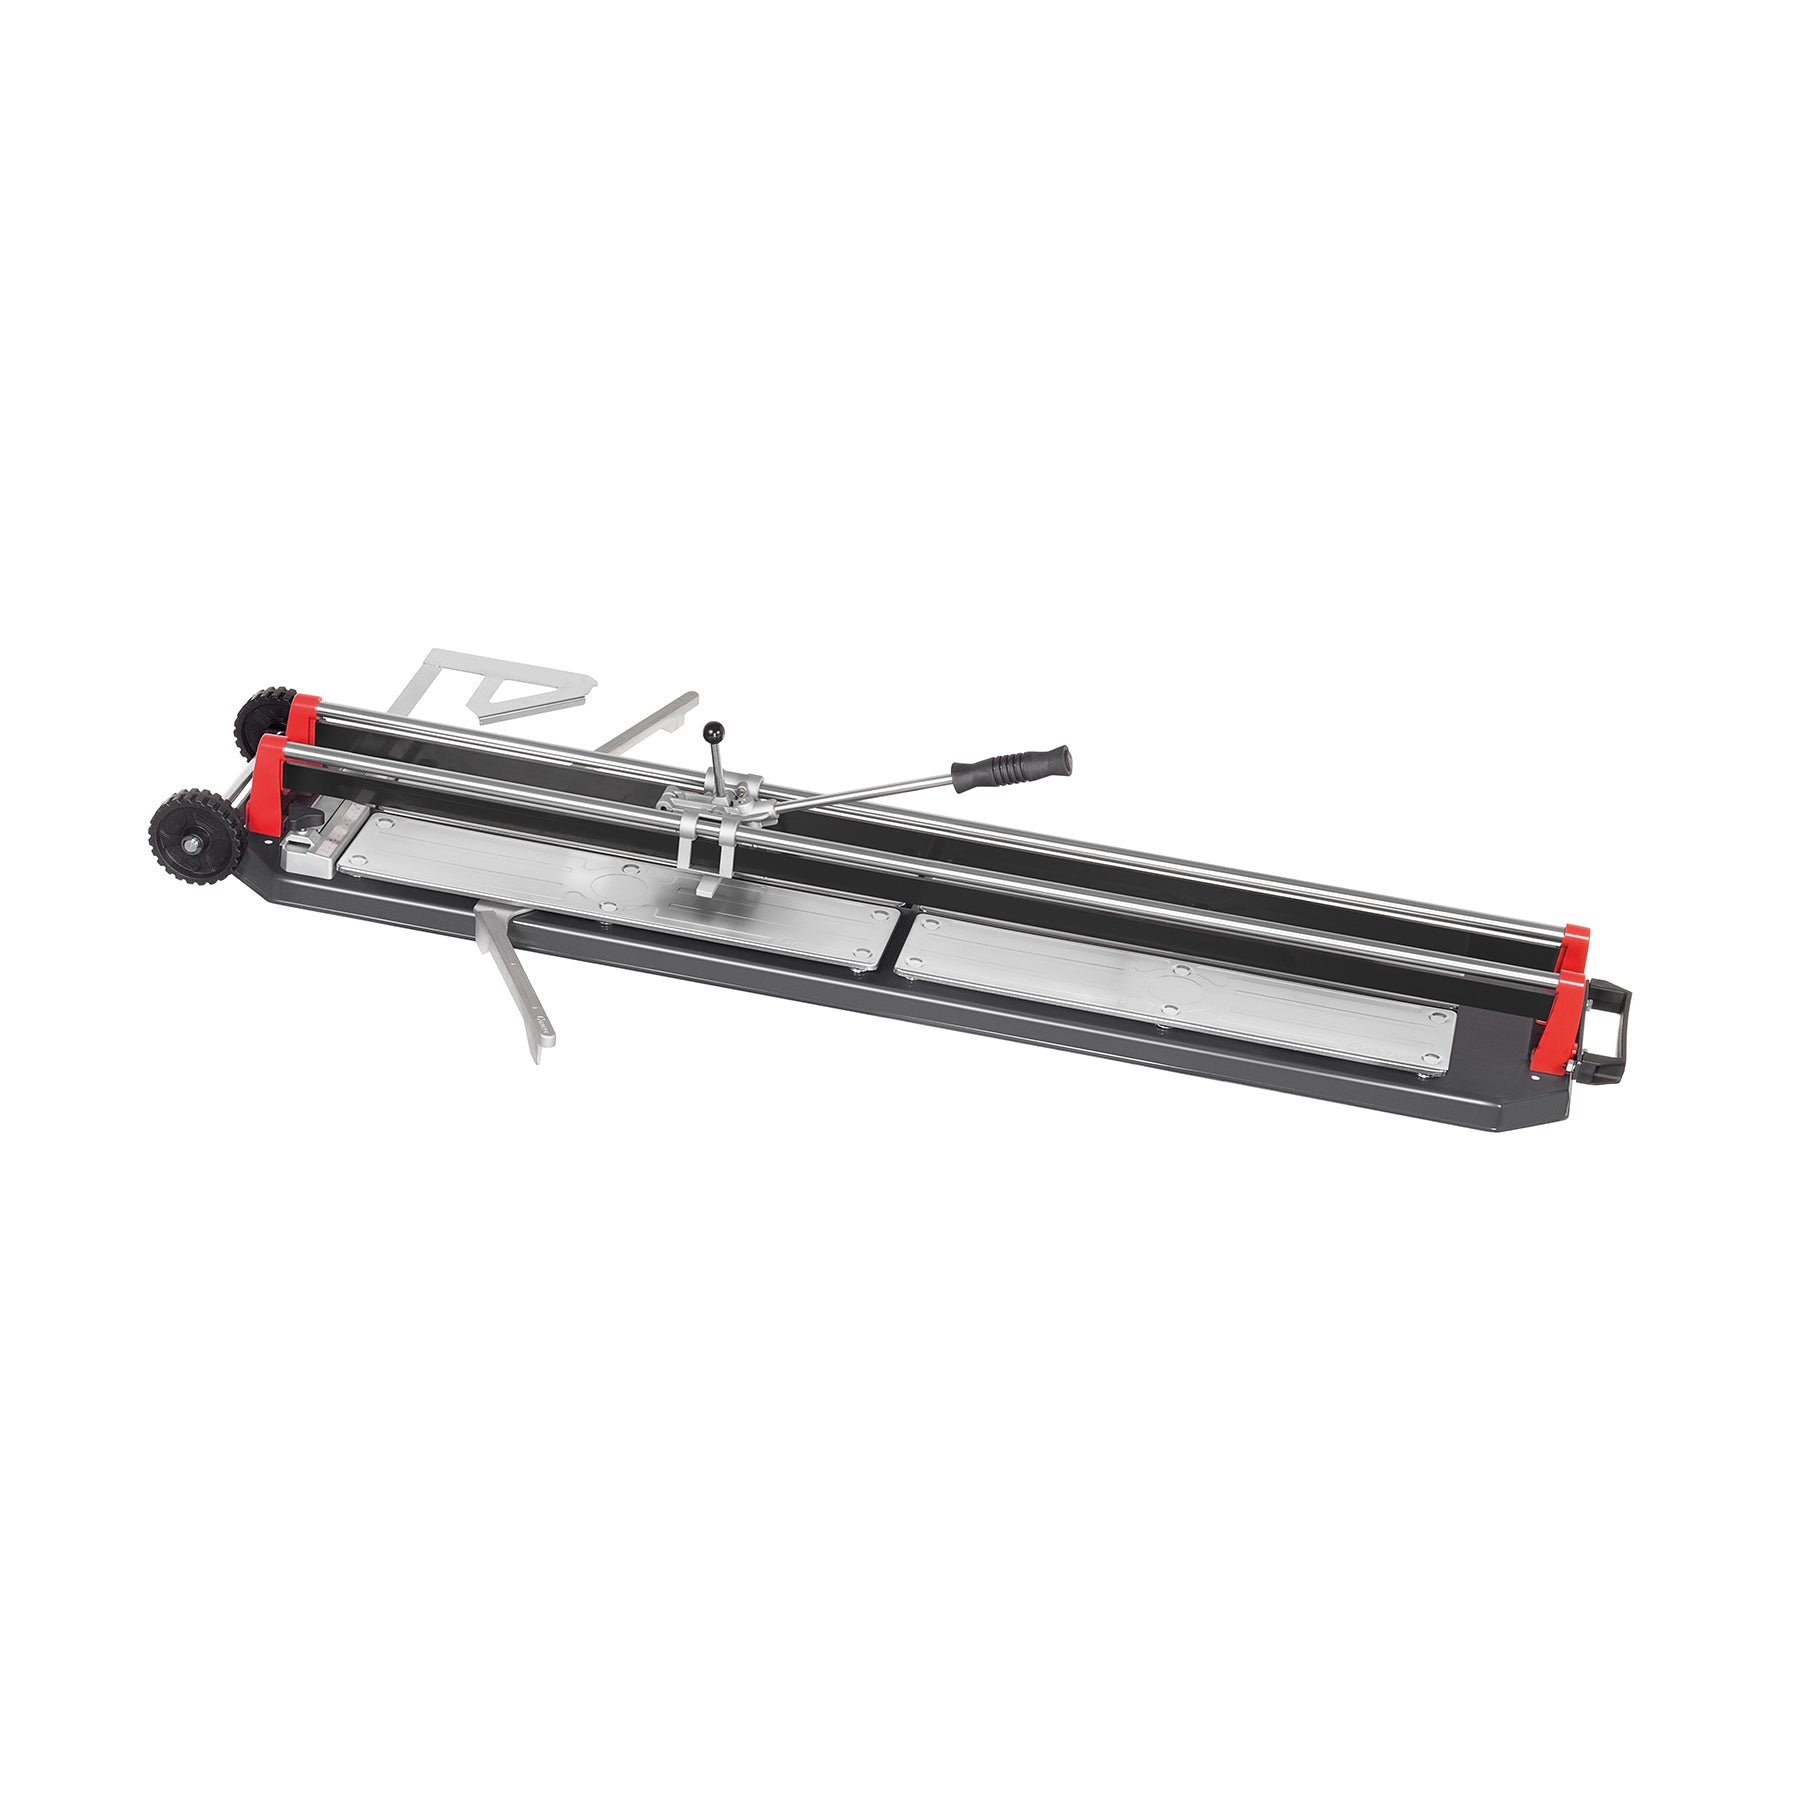 Manual Professional Tile Cutter Master Plus-125 With Wings For Ceramic & Porcelain Tiles up to 15mm Thick (For Diagonal Cutting 88 x 88 cm)